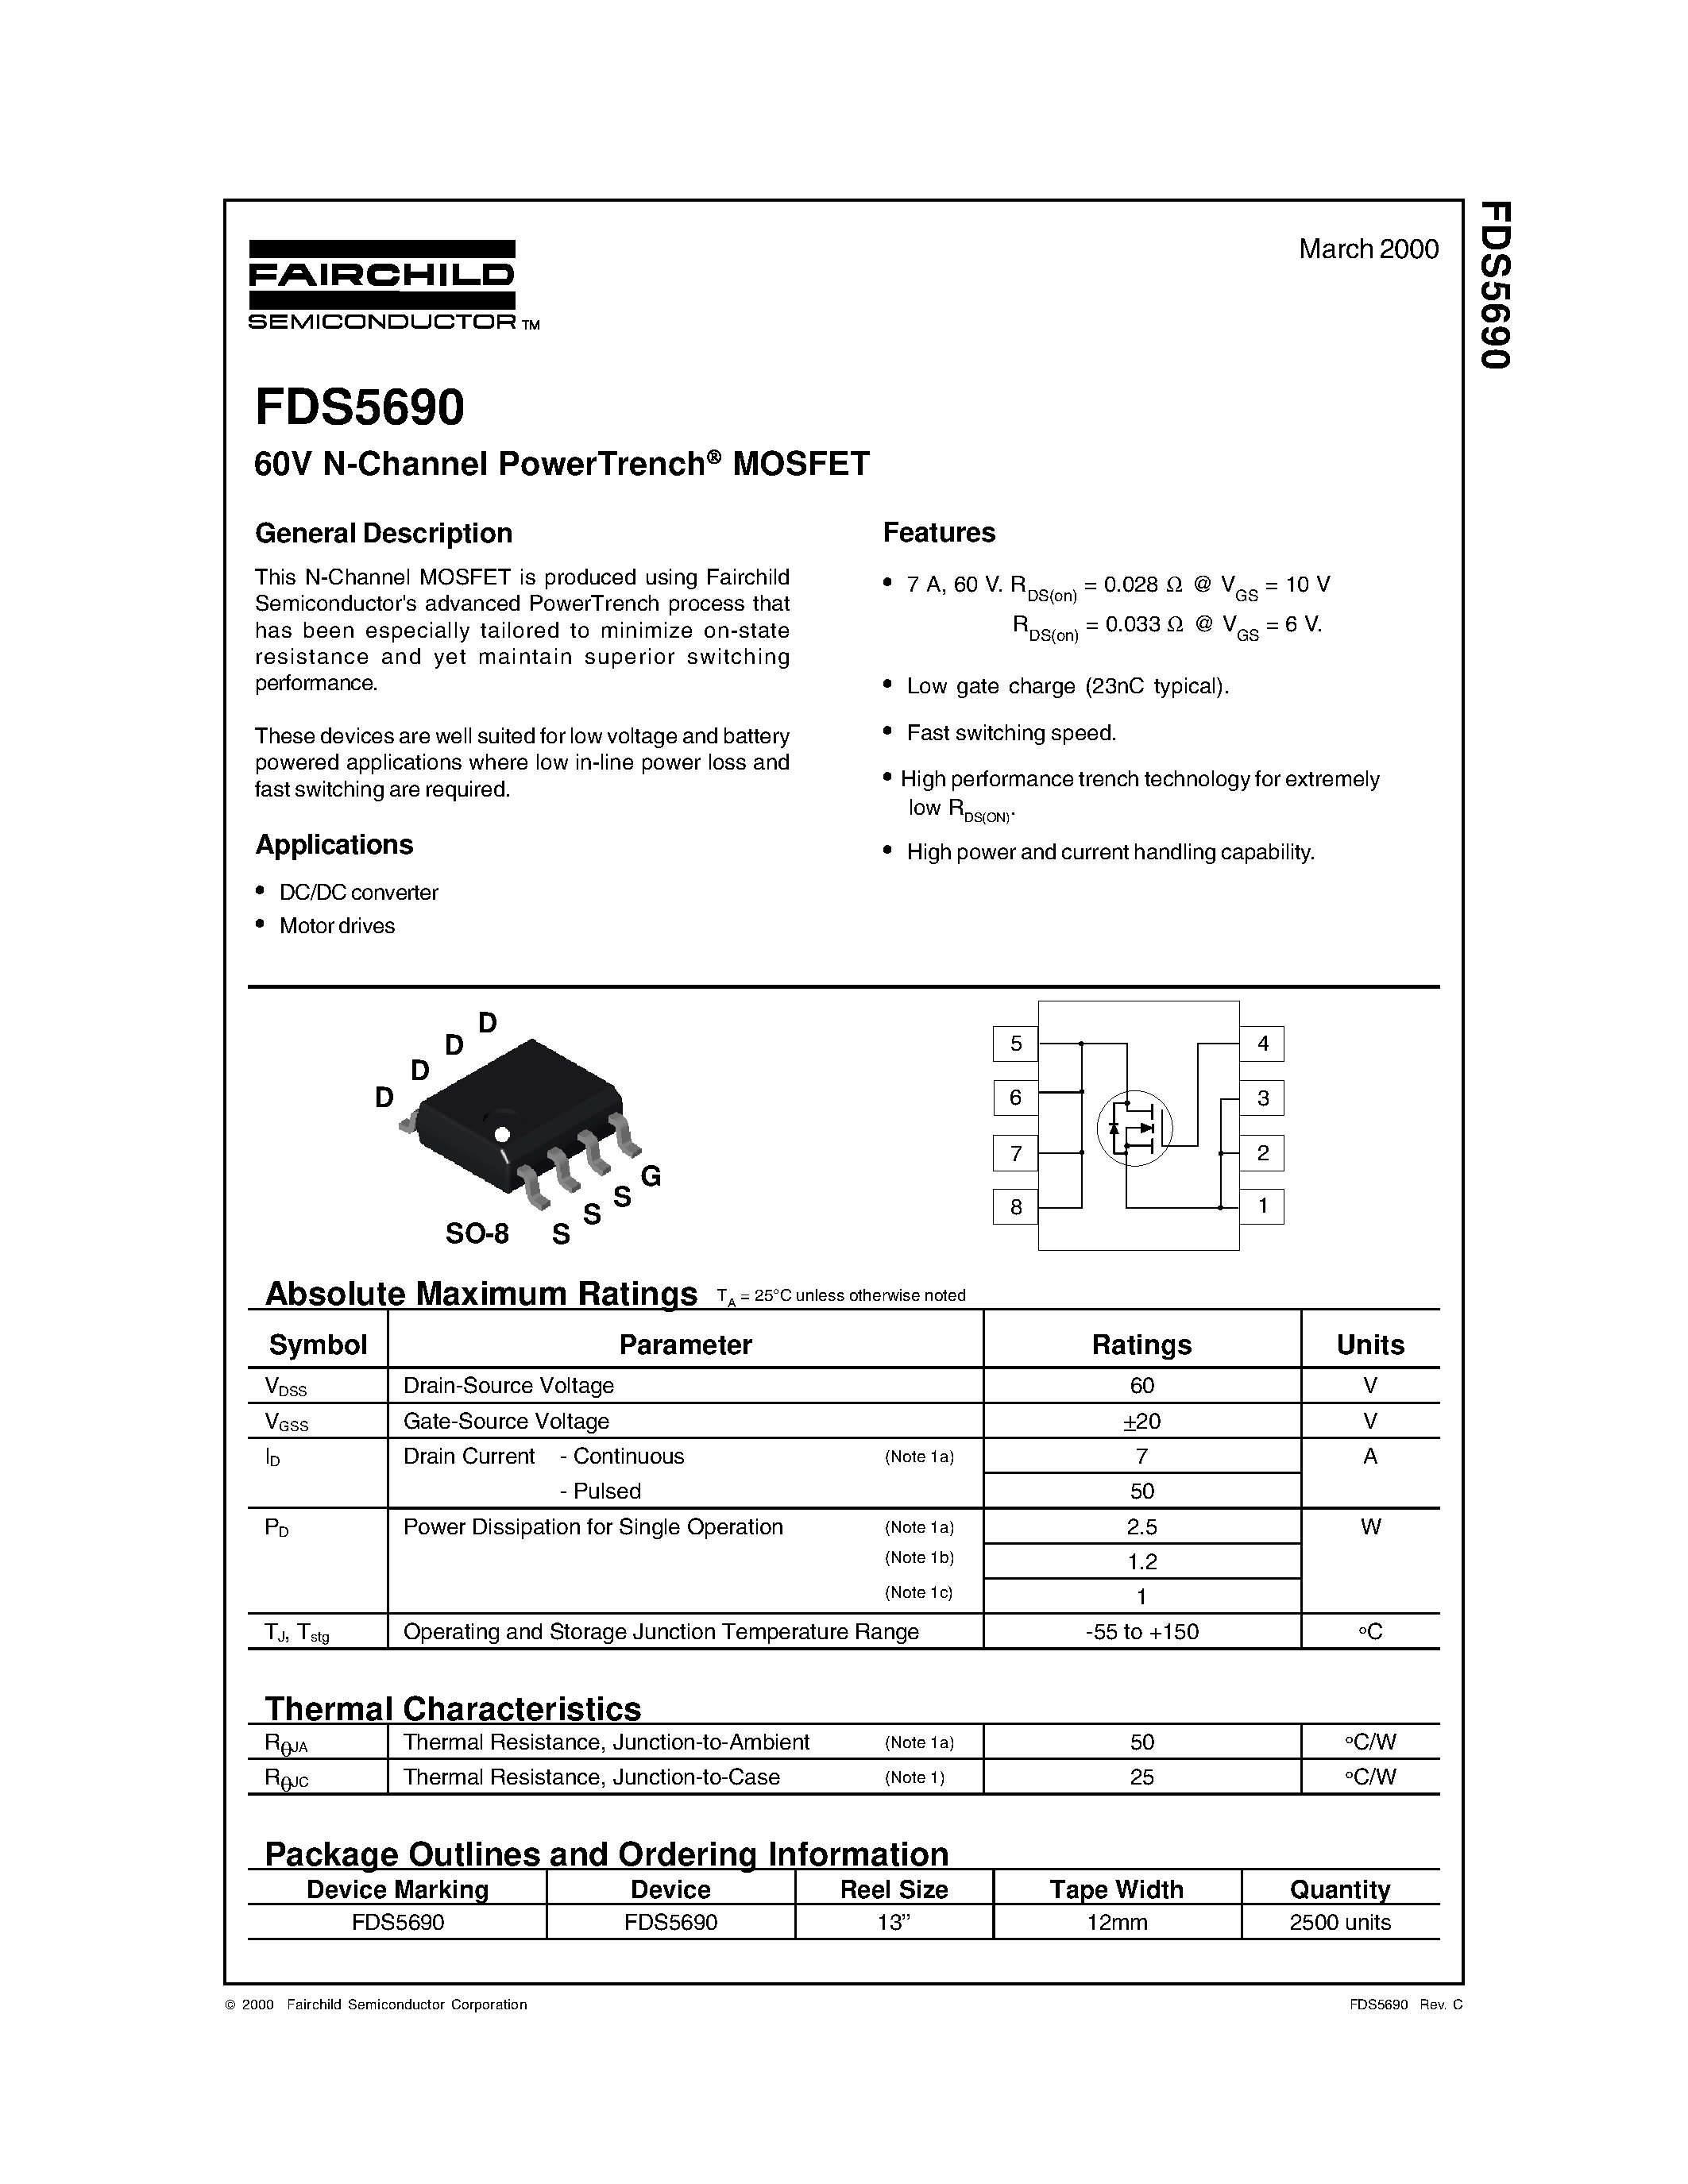 Даташит FDS5690 - 60V N-Channel PowerTrench MOSFET страница 1